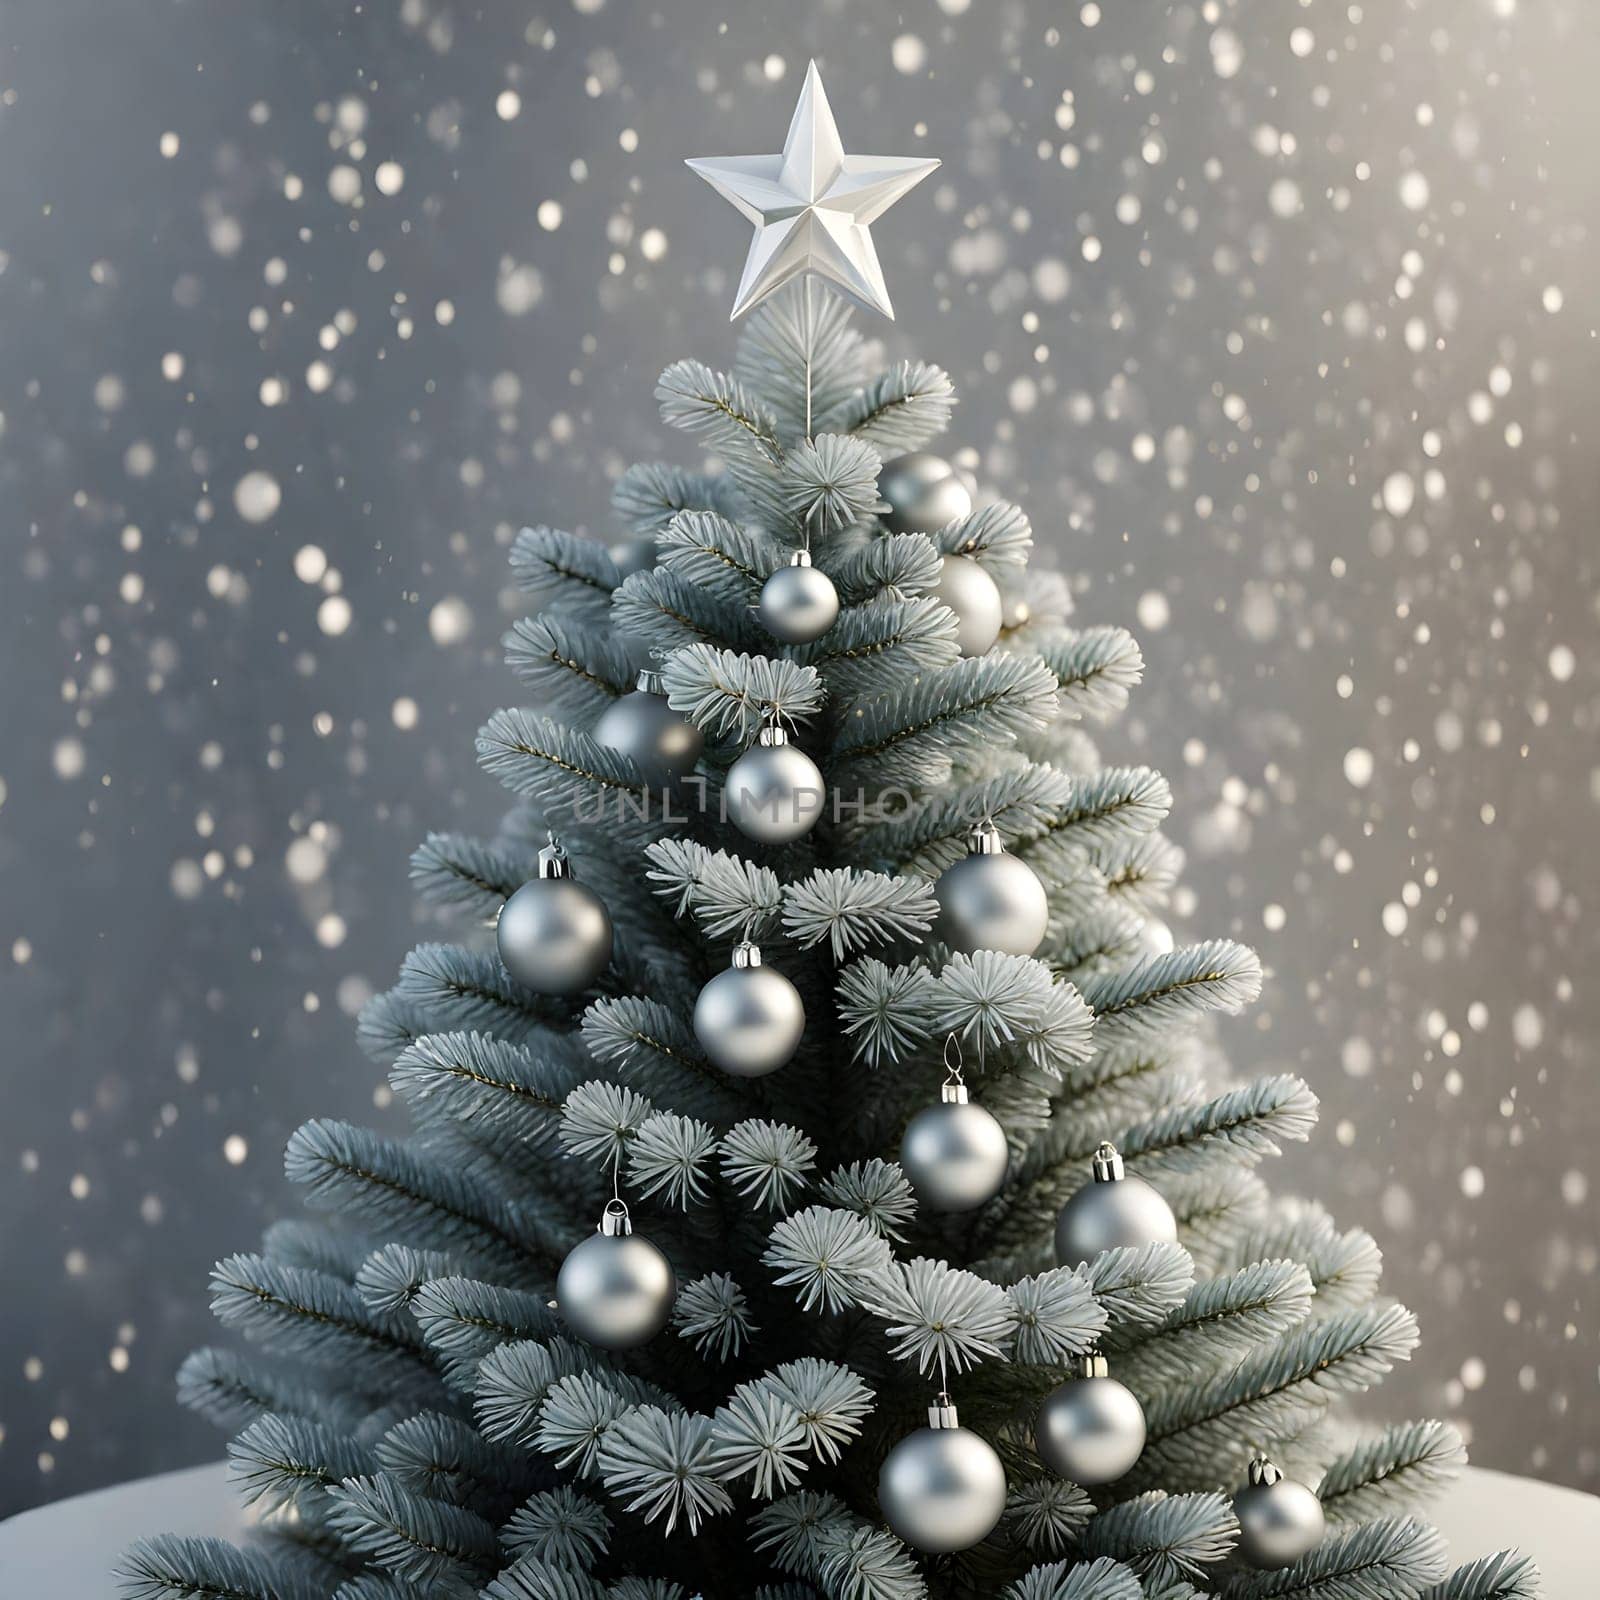 Christmas tree with silver balls, stars and snowflakes on gray background.